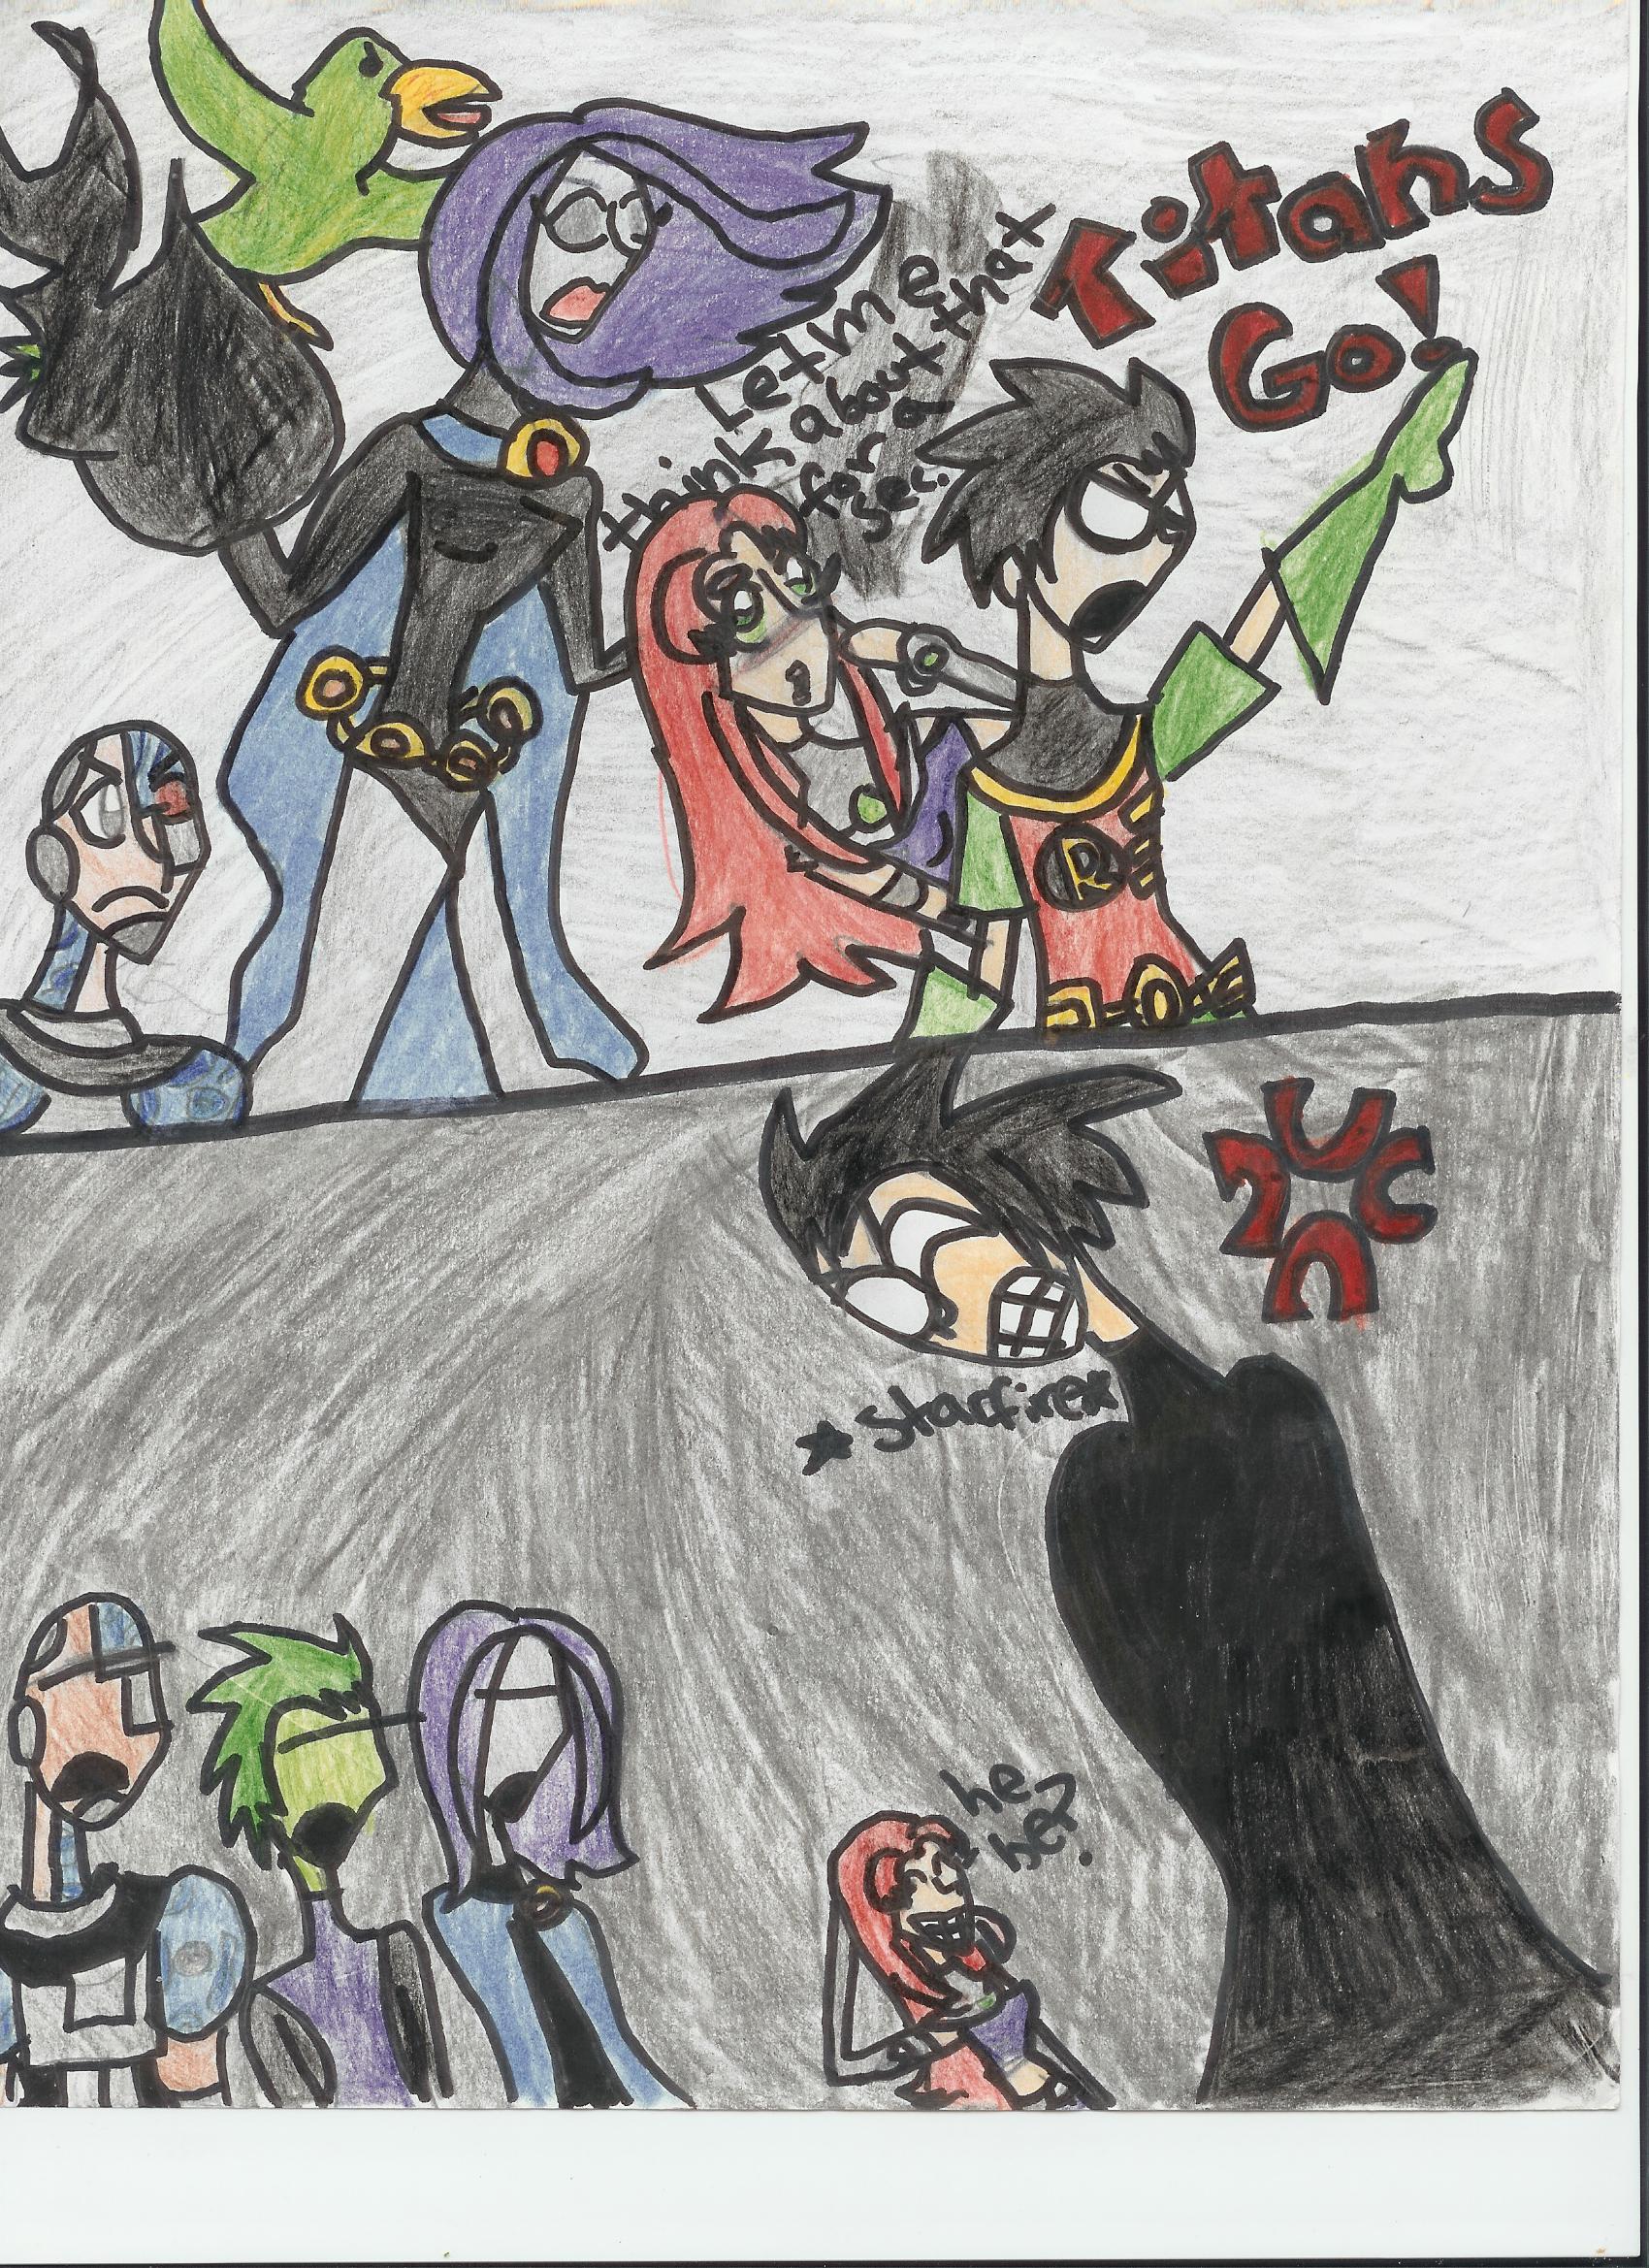 Titans Go Gone Wrong by linZart